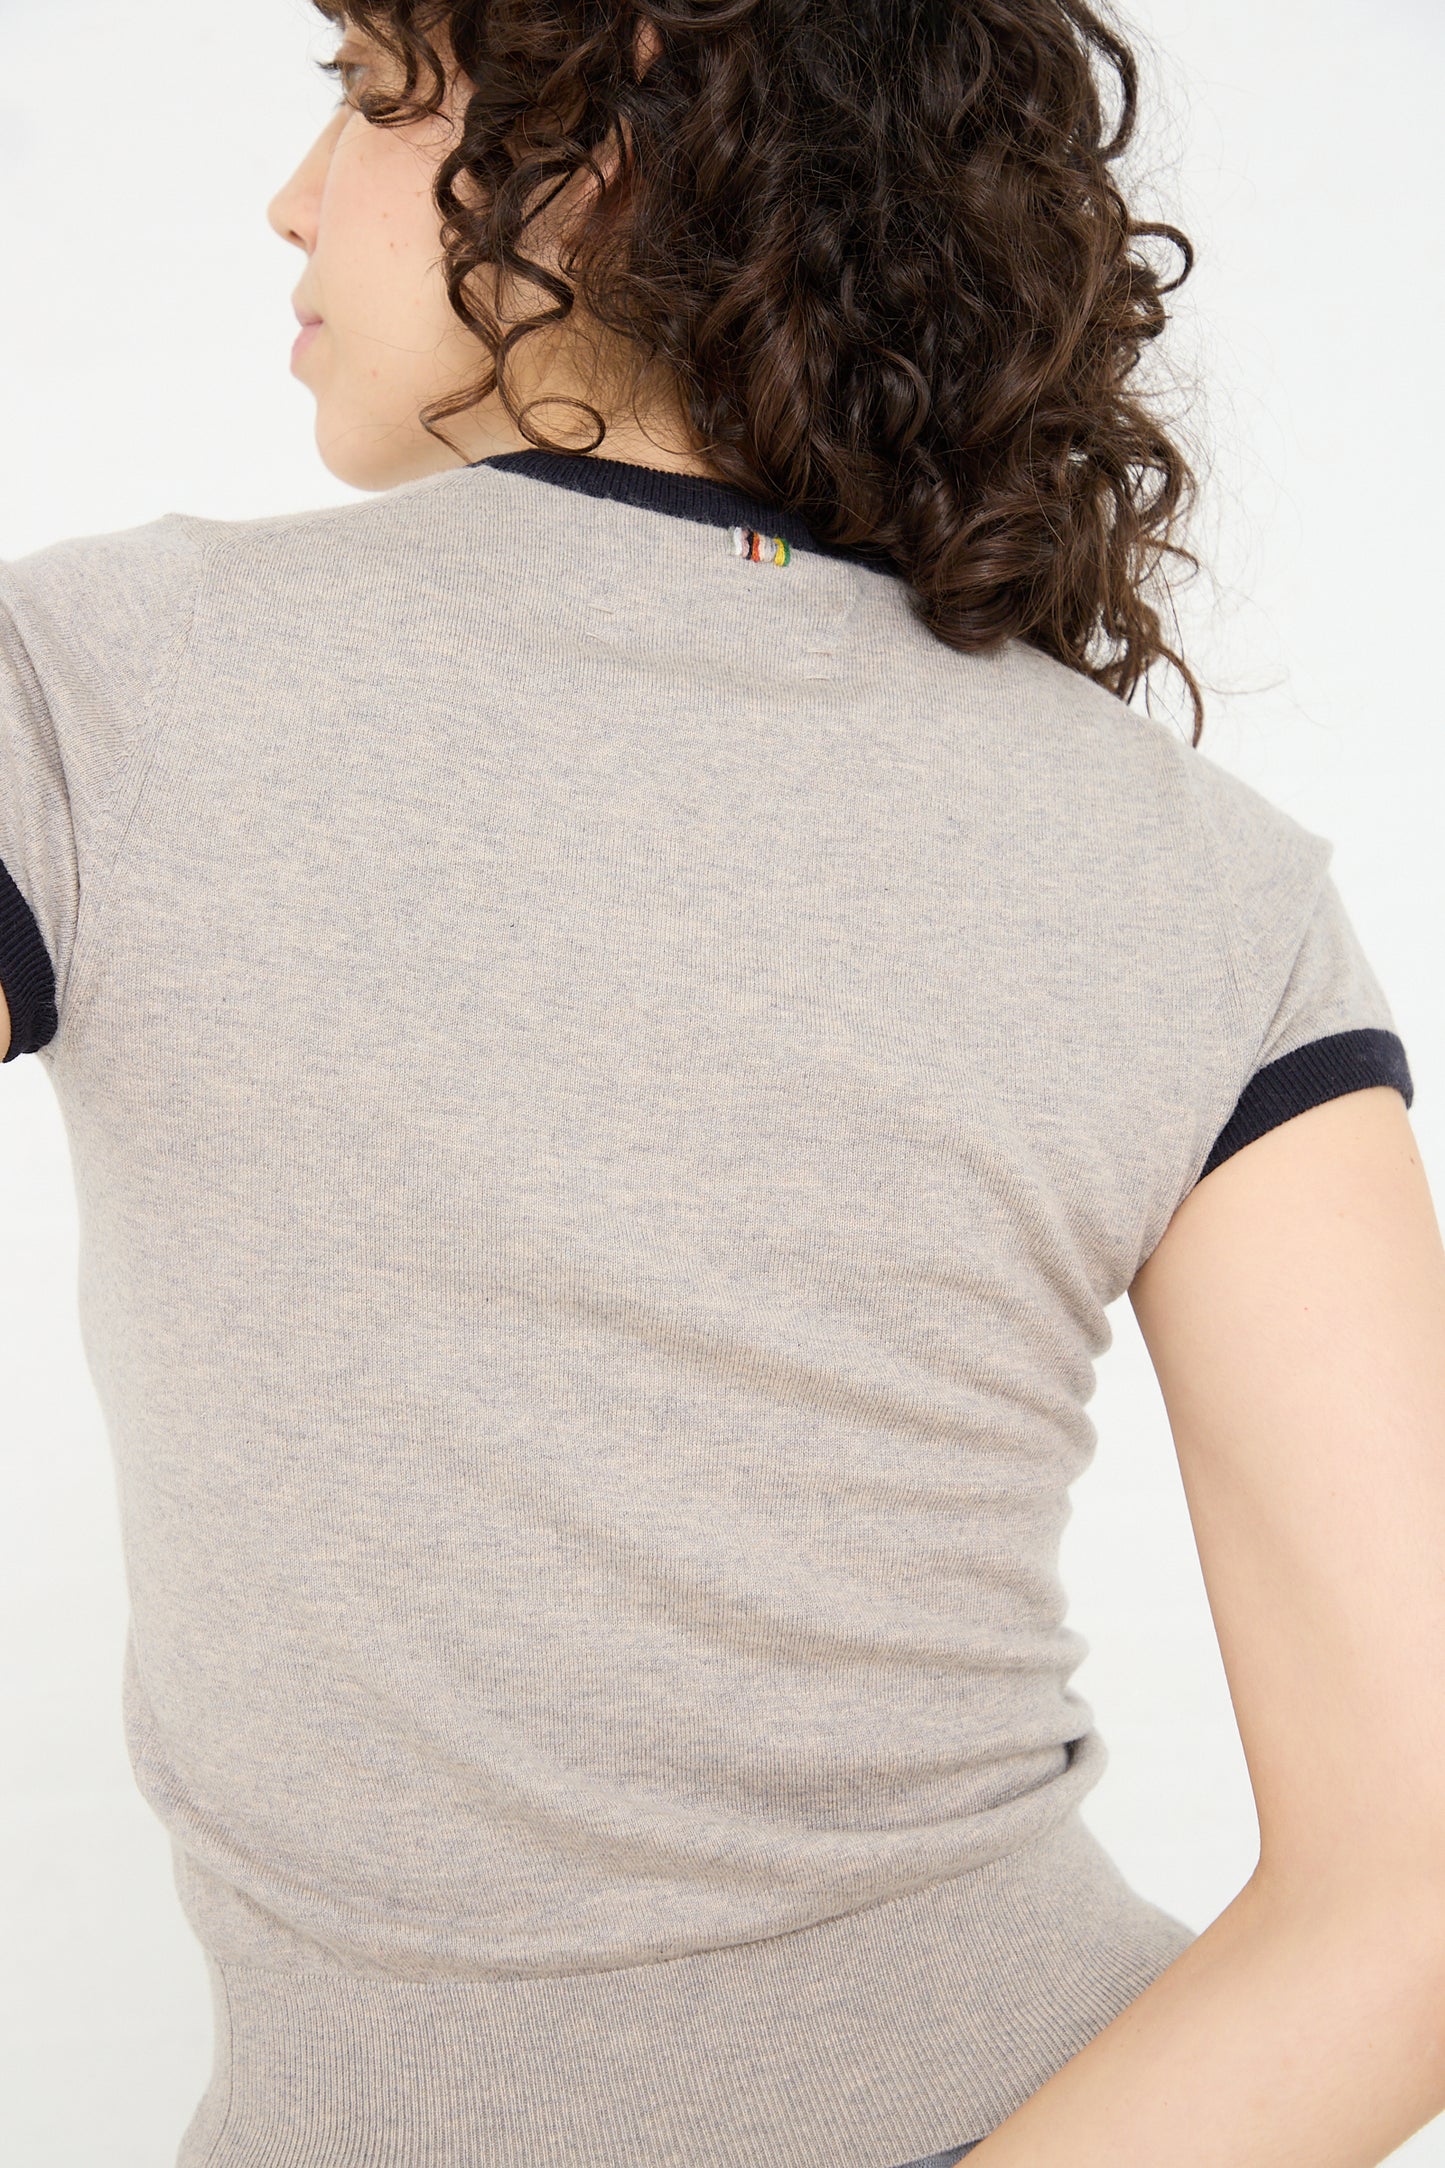 The woman is wearing a Cotton Cashmere No. 339 Chloe Tee in Gray/Navy by Extreme Cashmere.